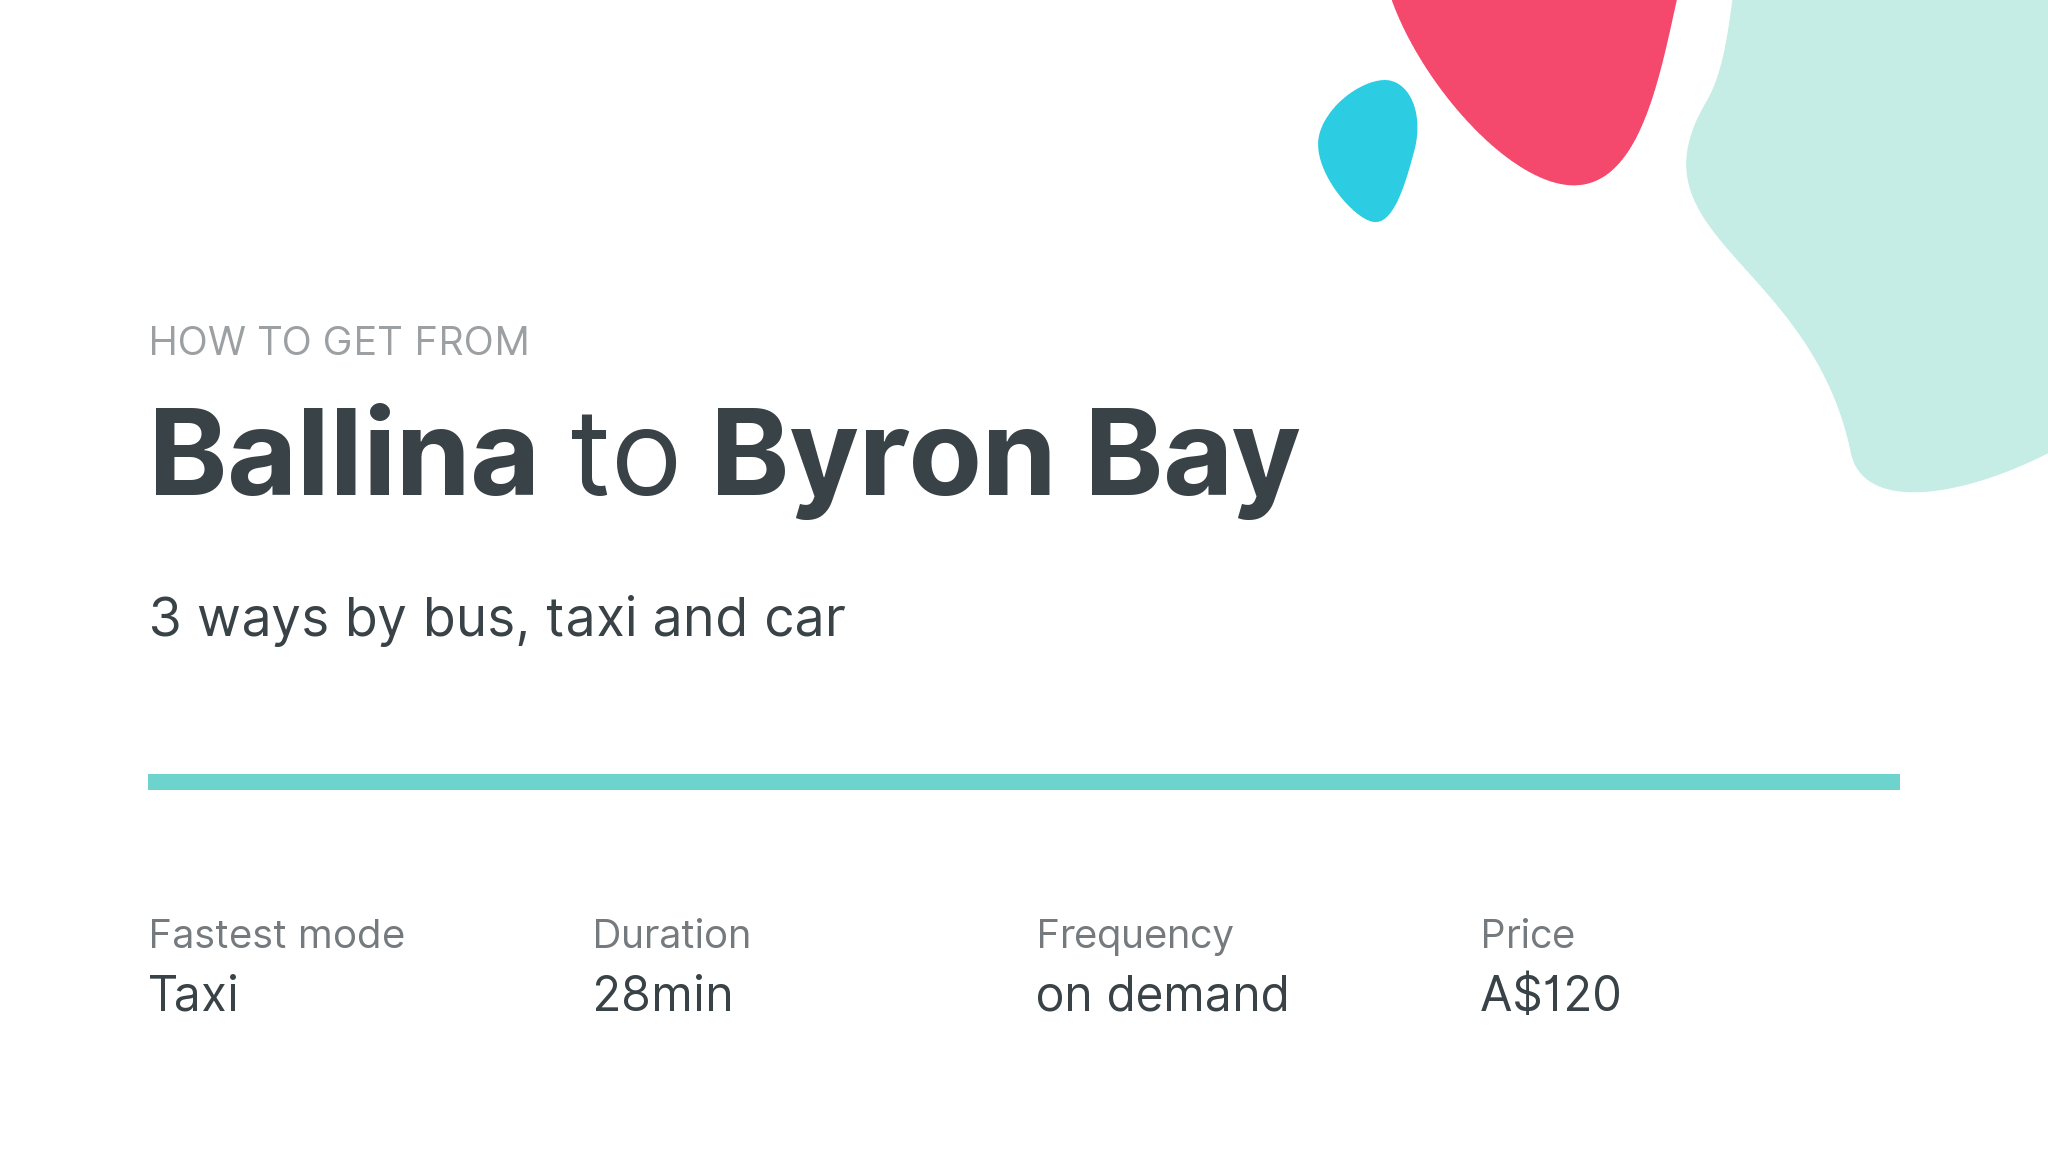 How do I get from Ballina to Byron Bay